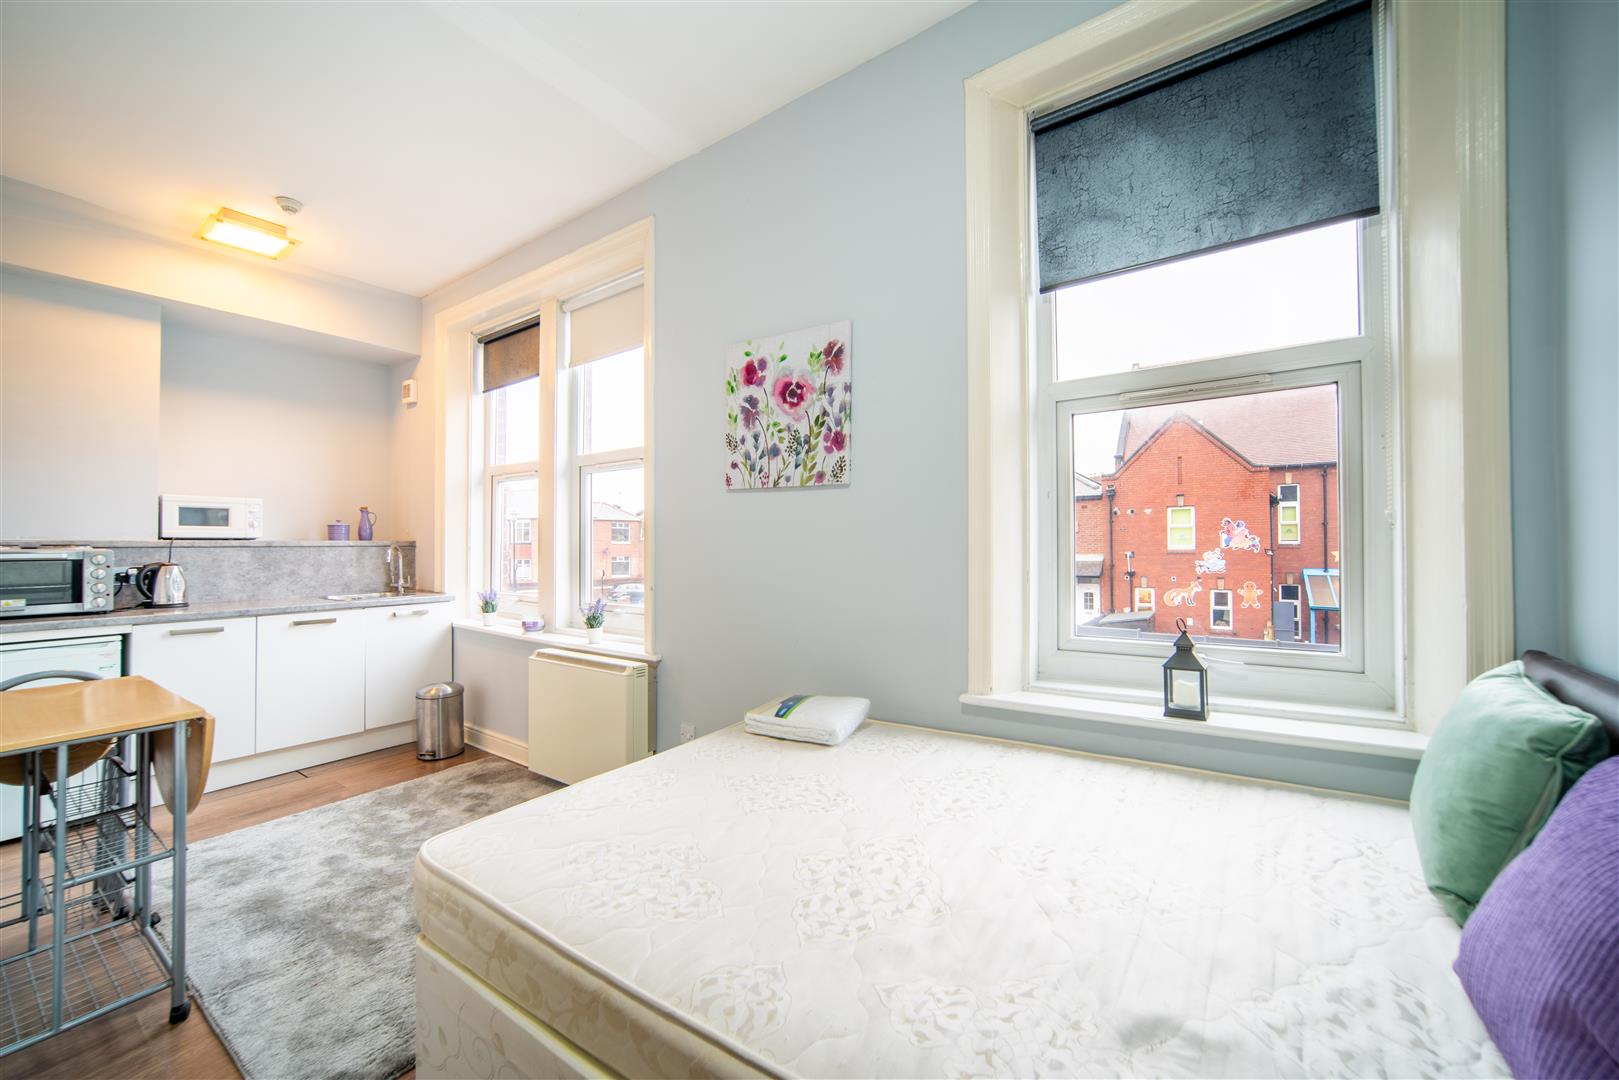 1 bed studio flat to rent in Chillingham Road, Newcastle Upon Tyne - Property Image 1